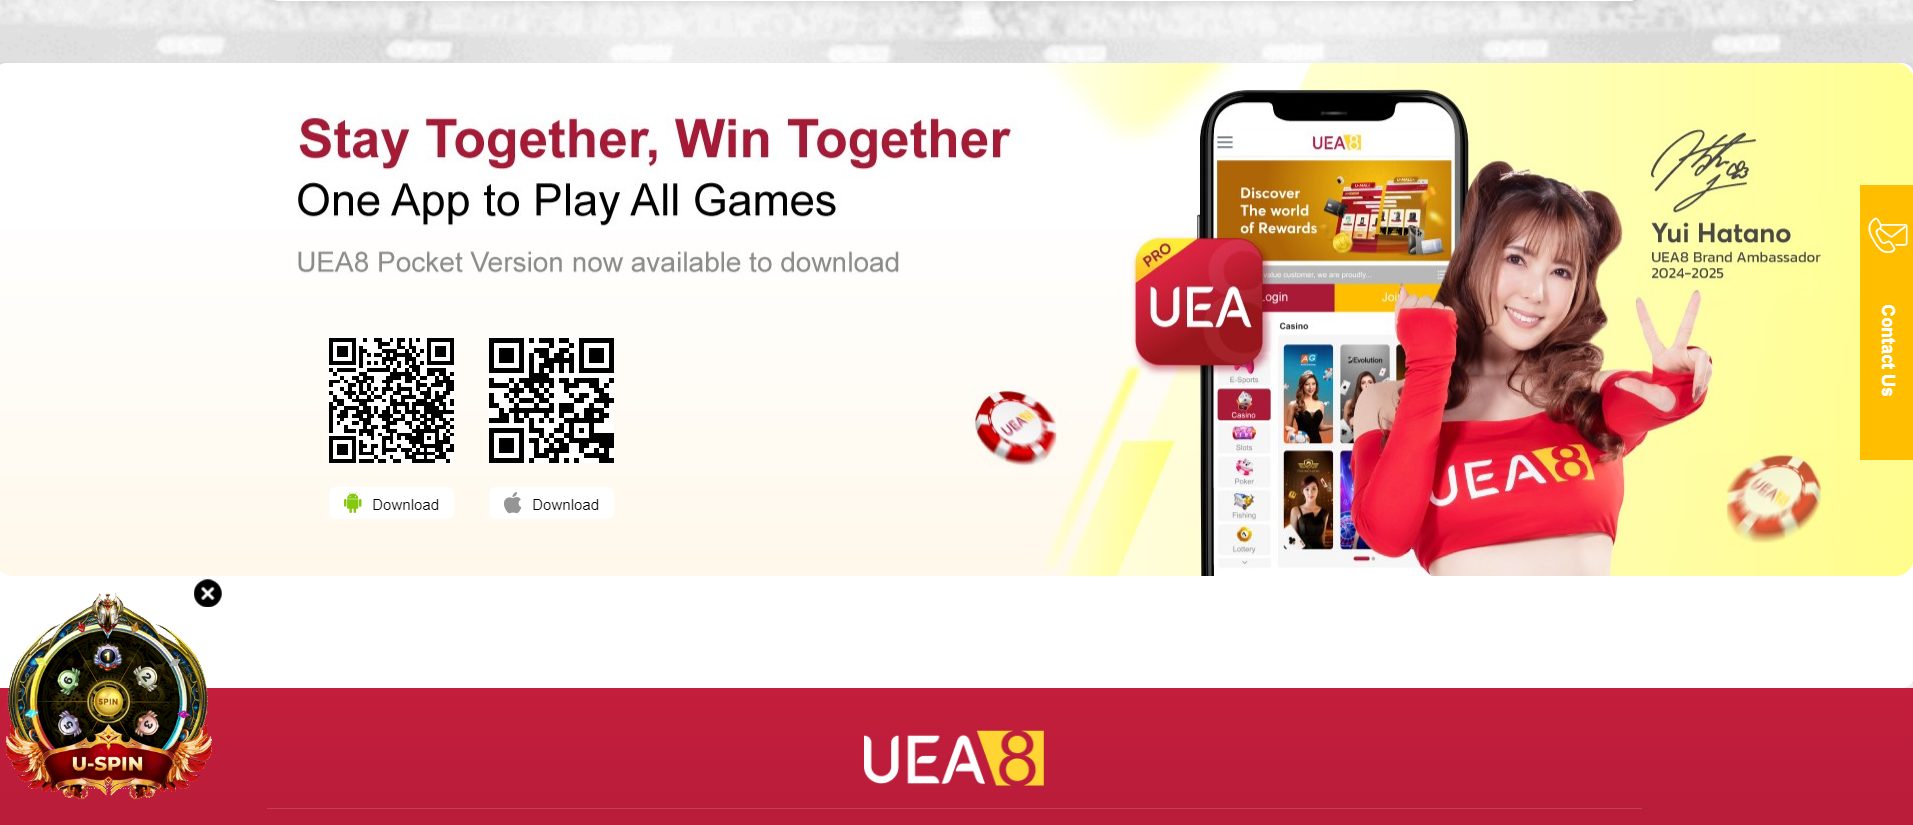 UEA8 makes its offering easily accessible by offering native mobile apps for Android and iOS devices